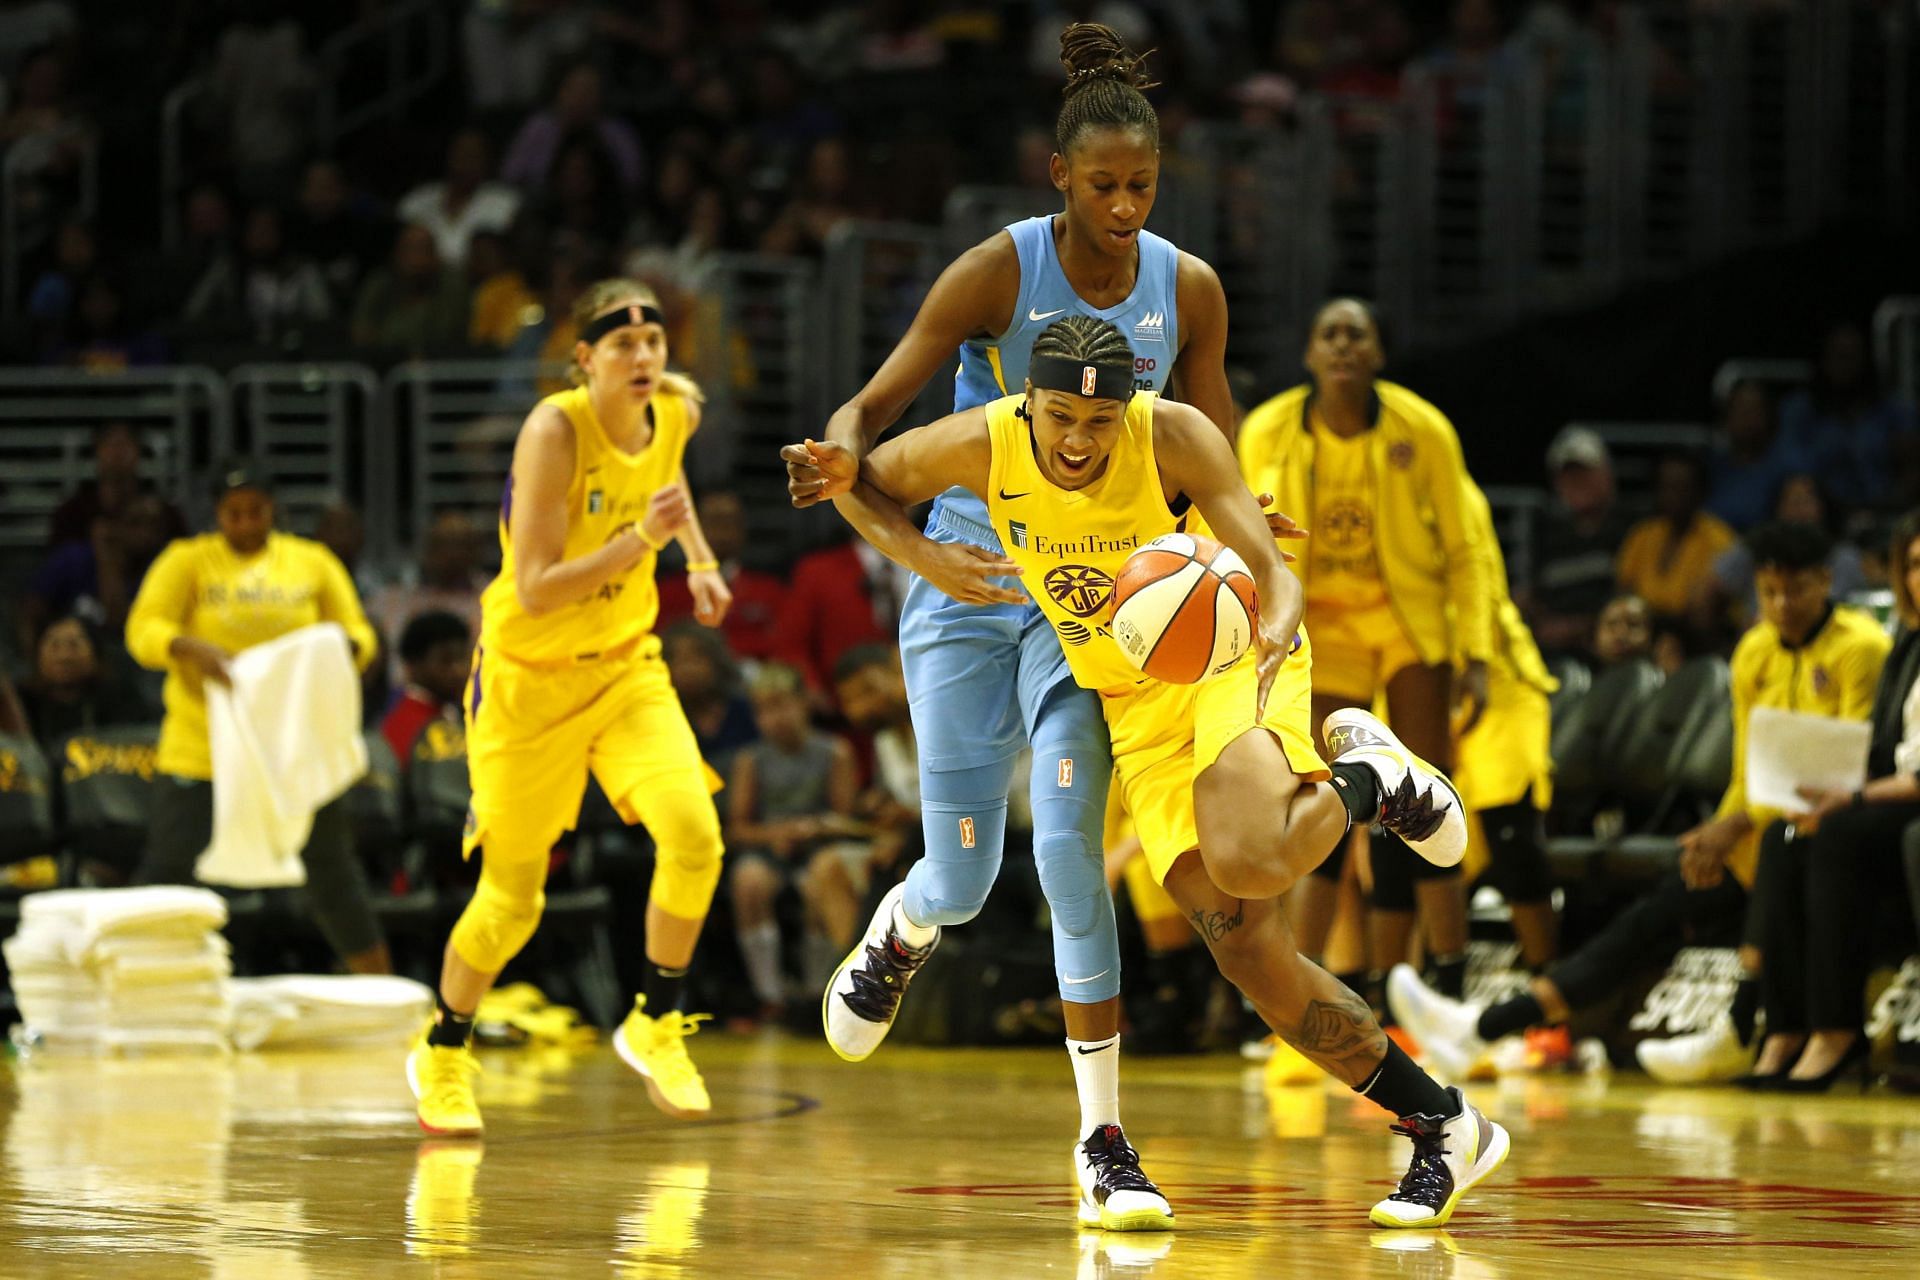 Los Angeles Sparks vs Chicago Sky Aces prediction & game preview